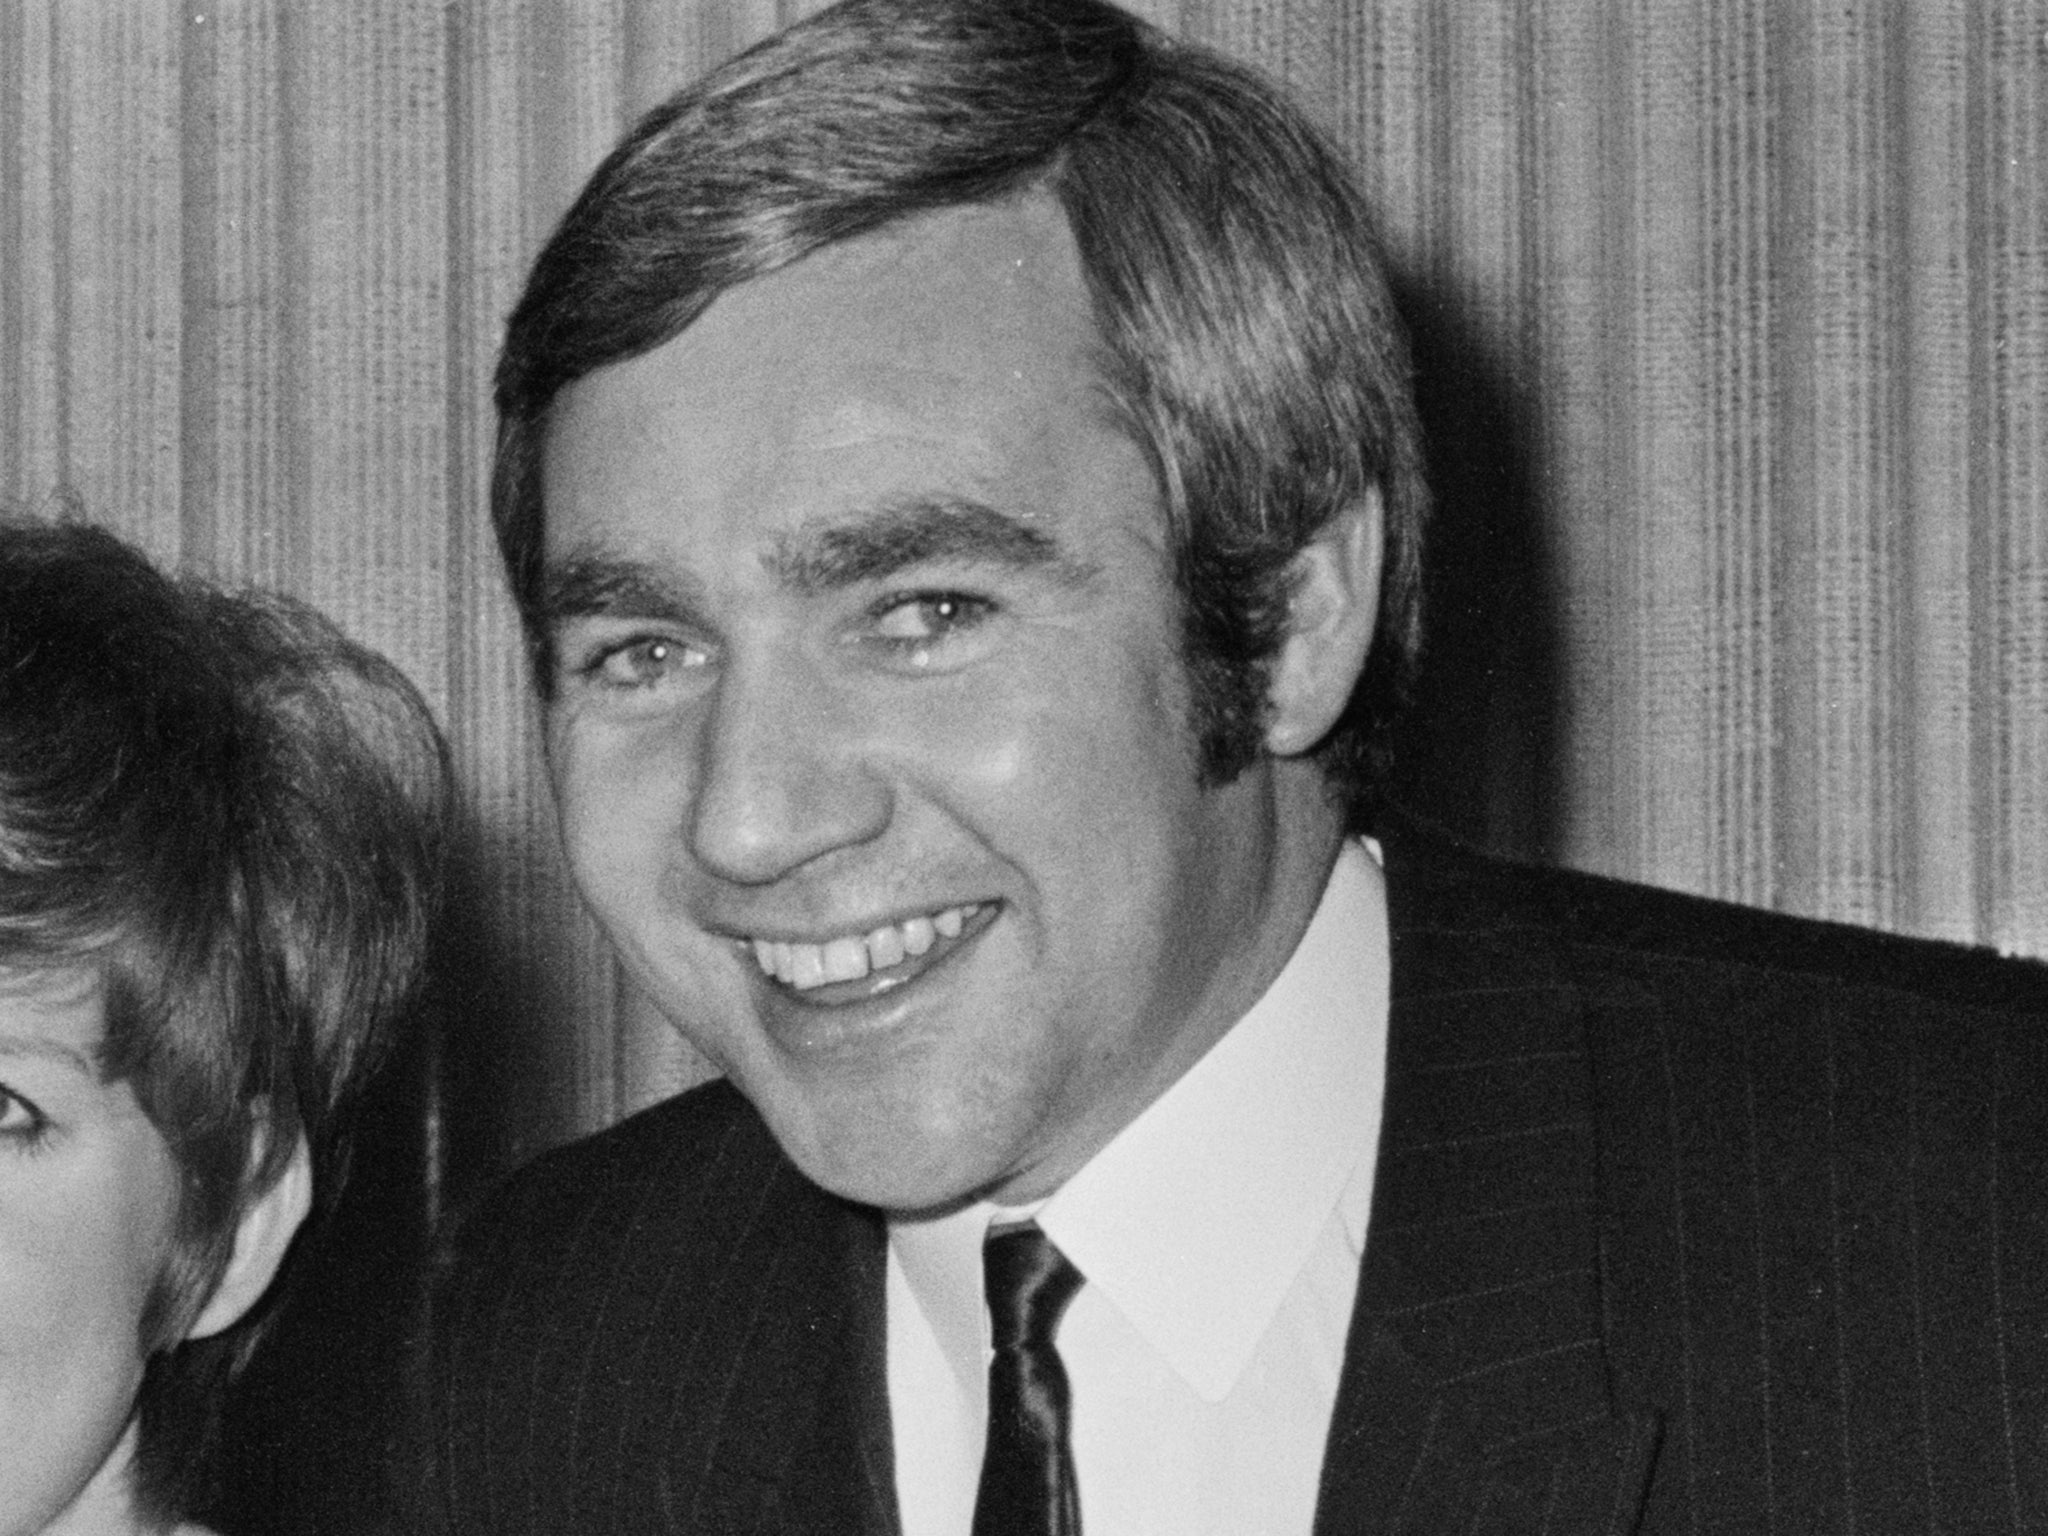 Martin in 1968: he penned songs for everyone from Ken Dodd to Elvis